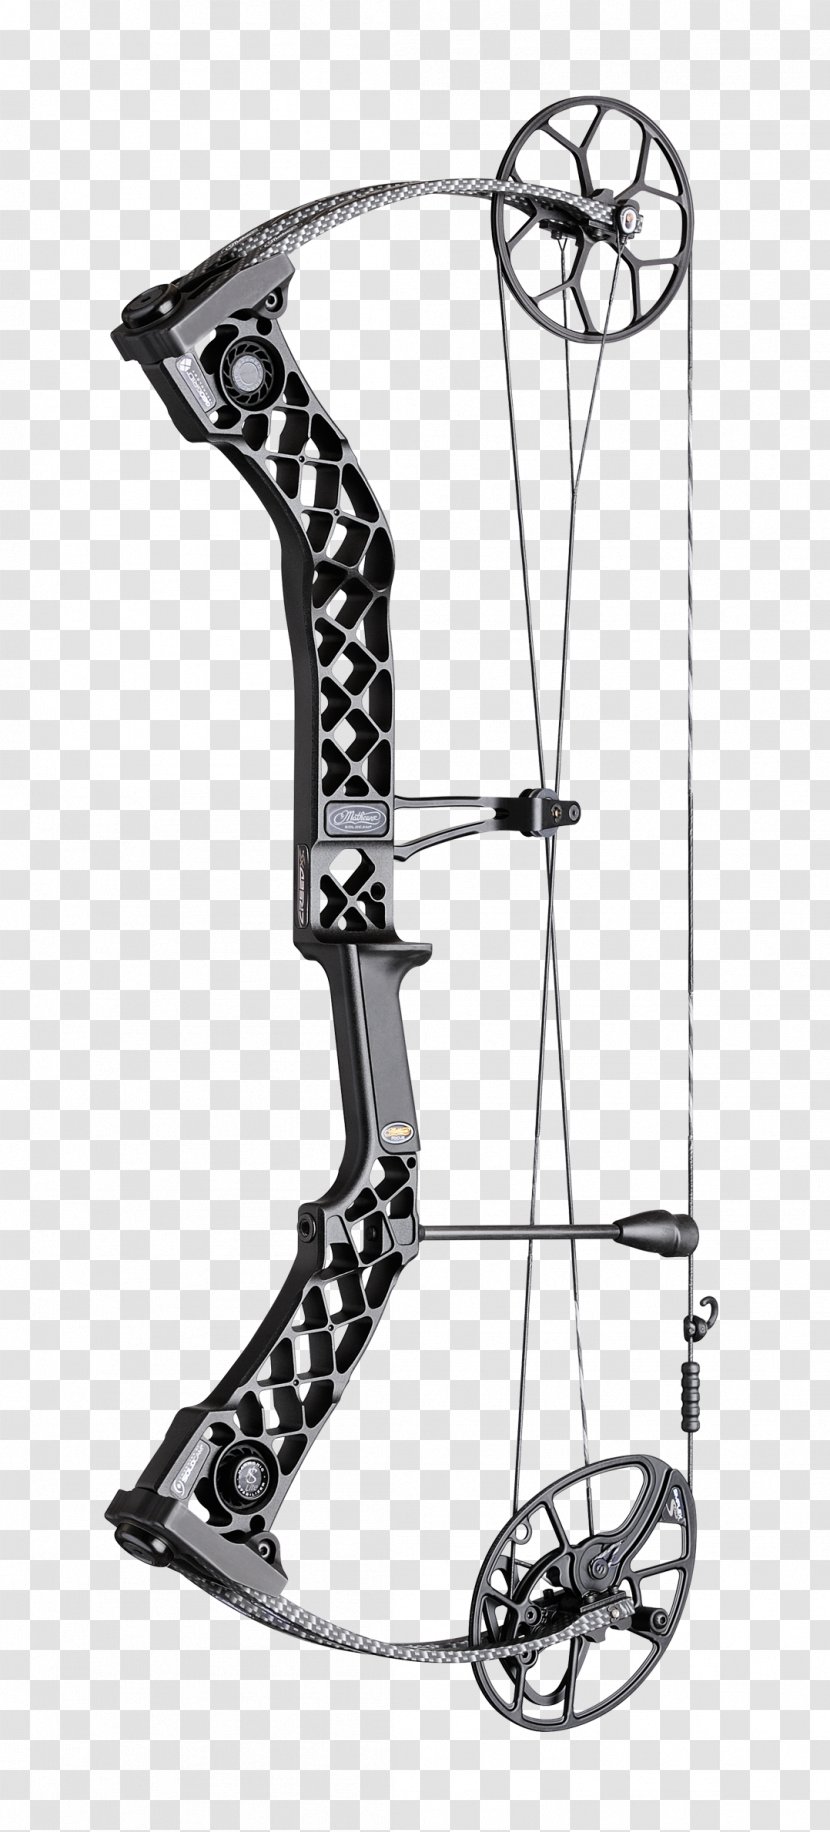 Bow And Arrow Compound Bows Archery Bowhunting - Cross Arrows Transparent PNG